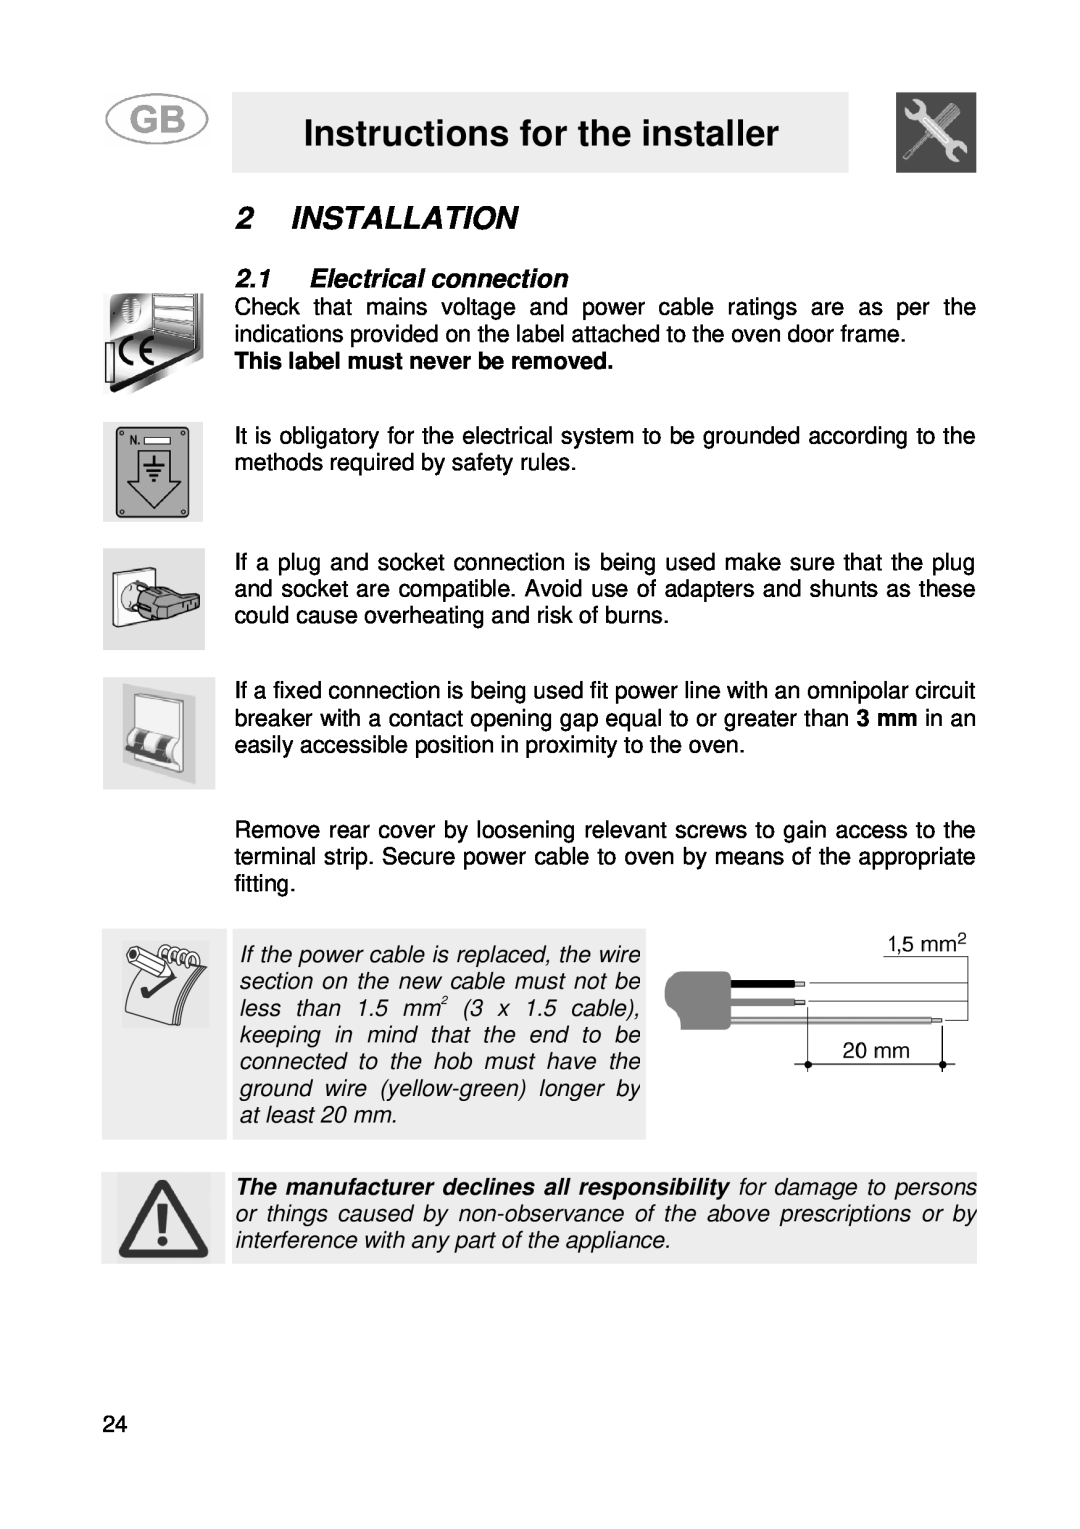 Smeg SE900-5 manual Instructions for the installer, Installation, Electrical connection, This label must never be removed 